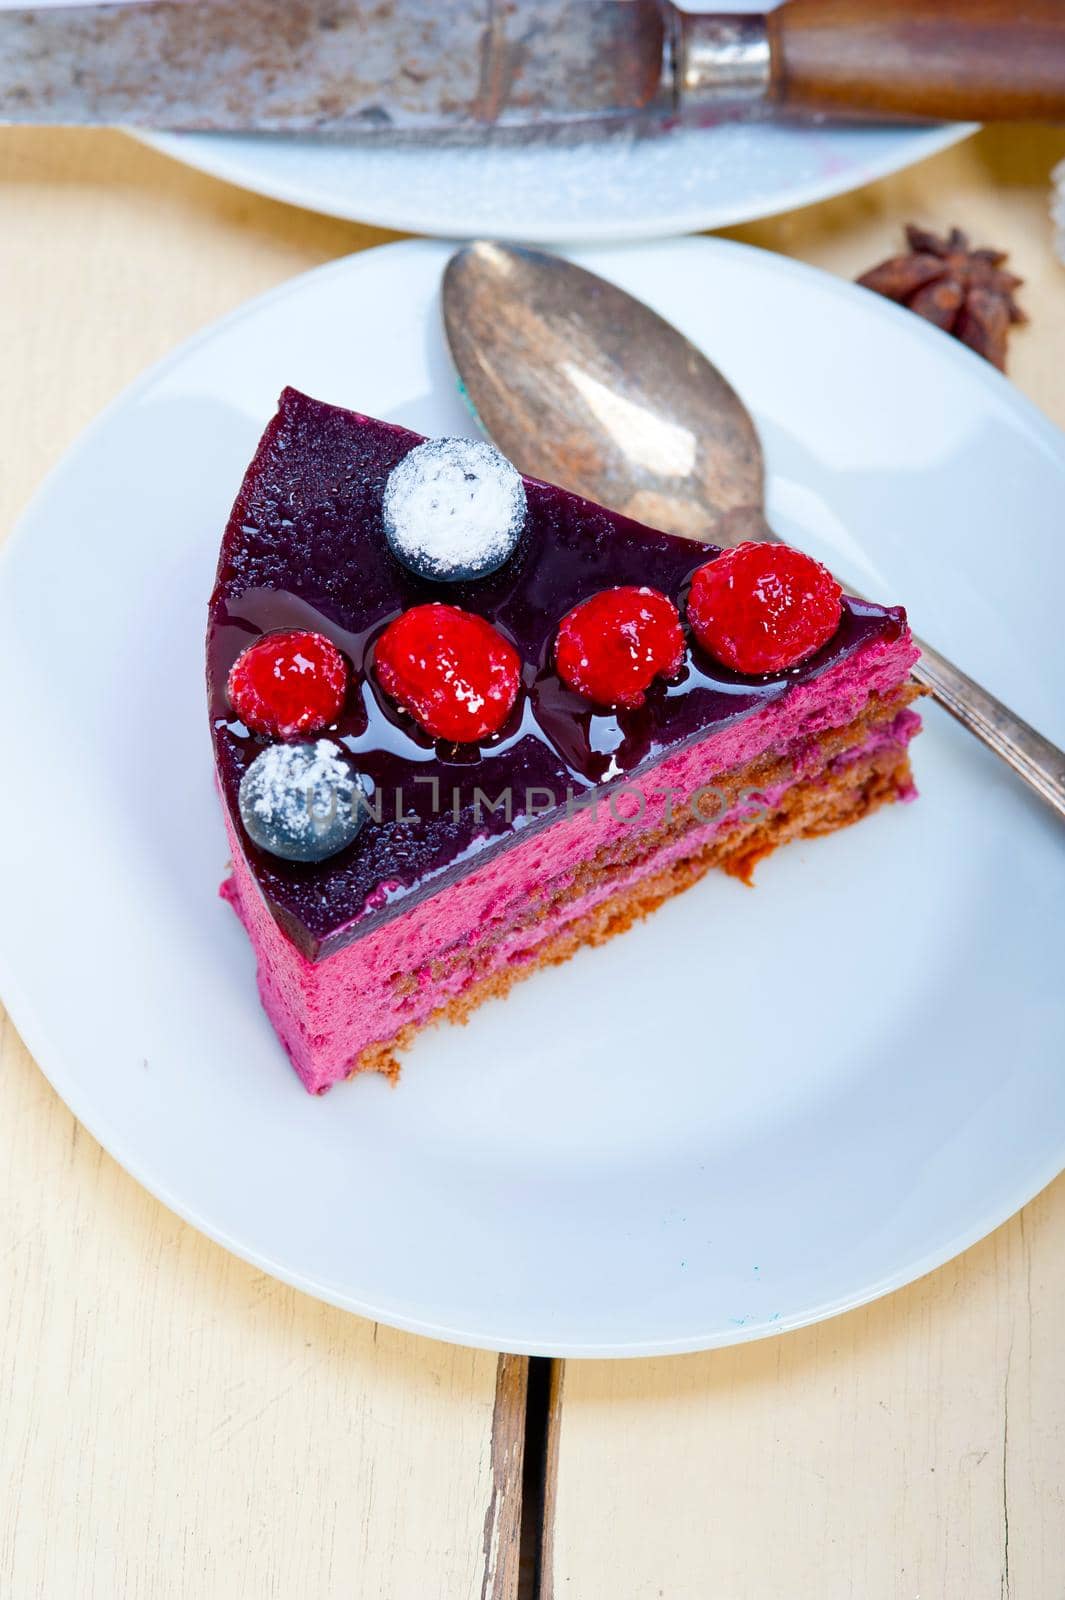 blueberry and raspberry cake mousse dessert by keko64